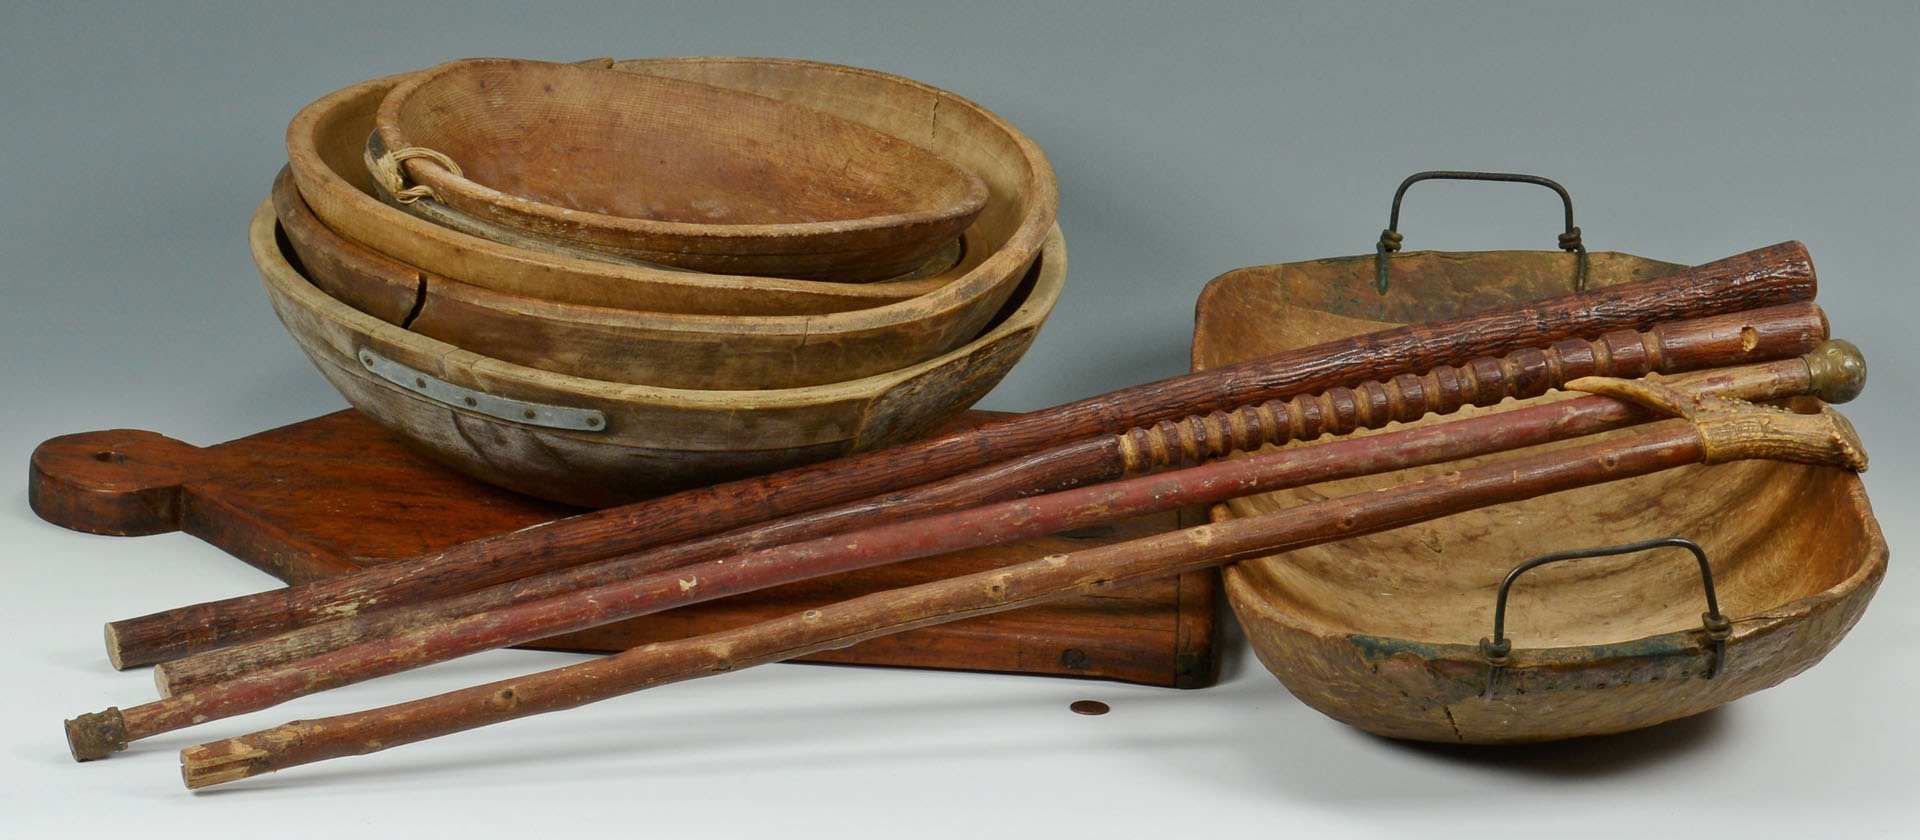 Lot 538: Grouping of Wooden Dough Bowls & Other Items, 11pc